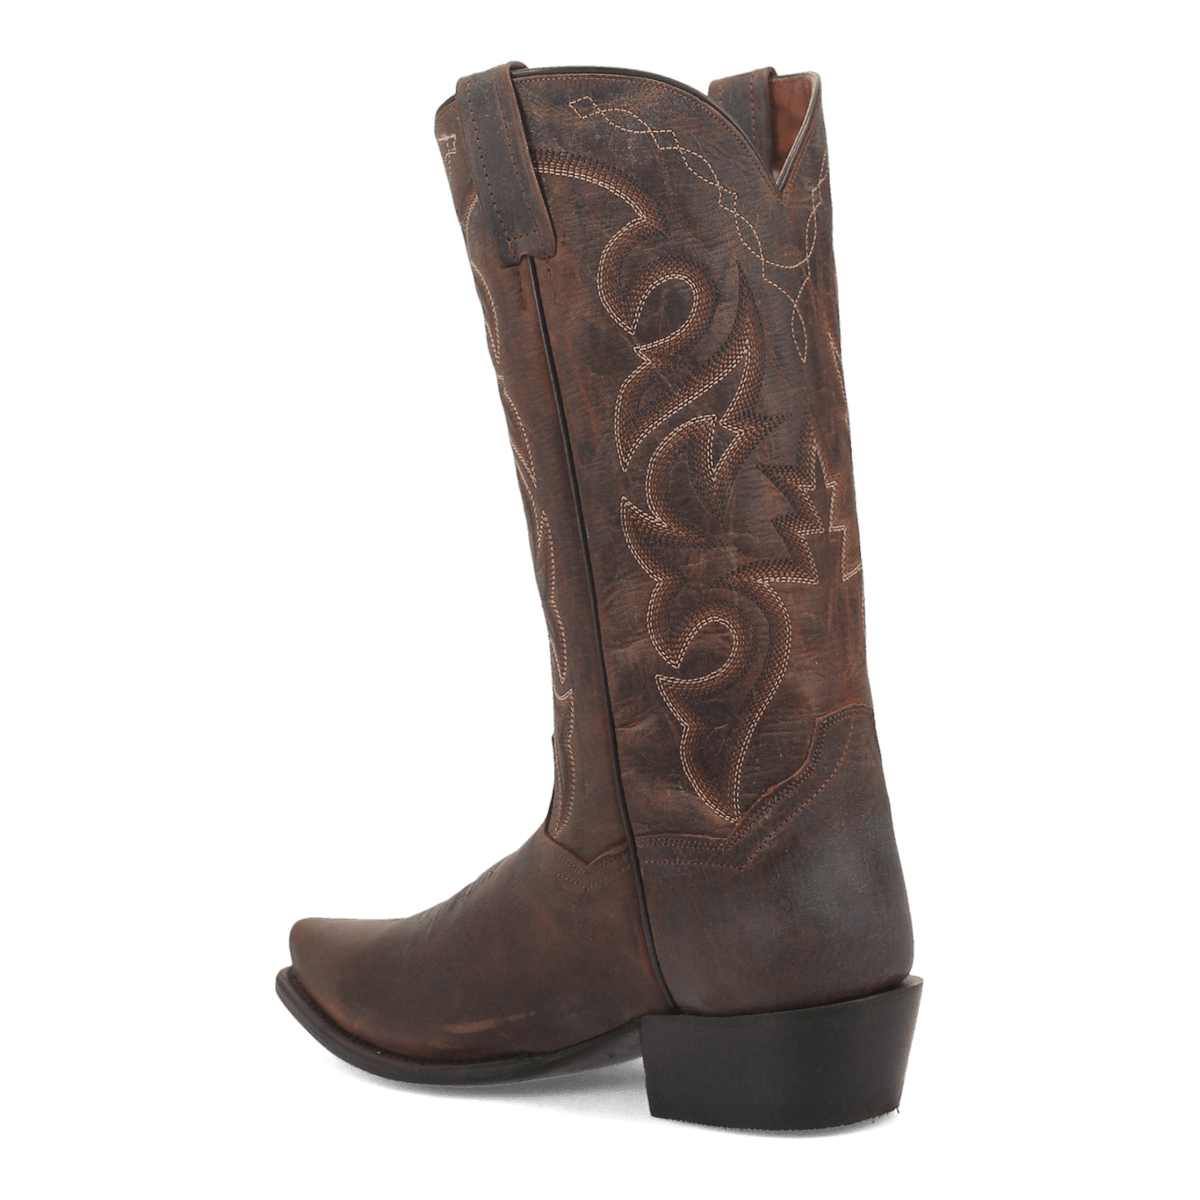 RENEGADE S LEATHER BOOT Image